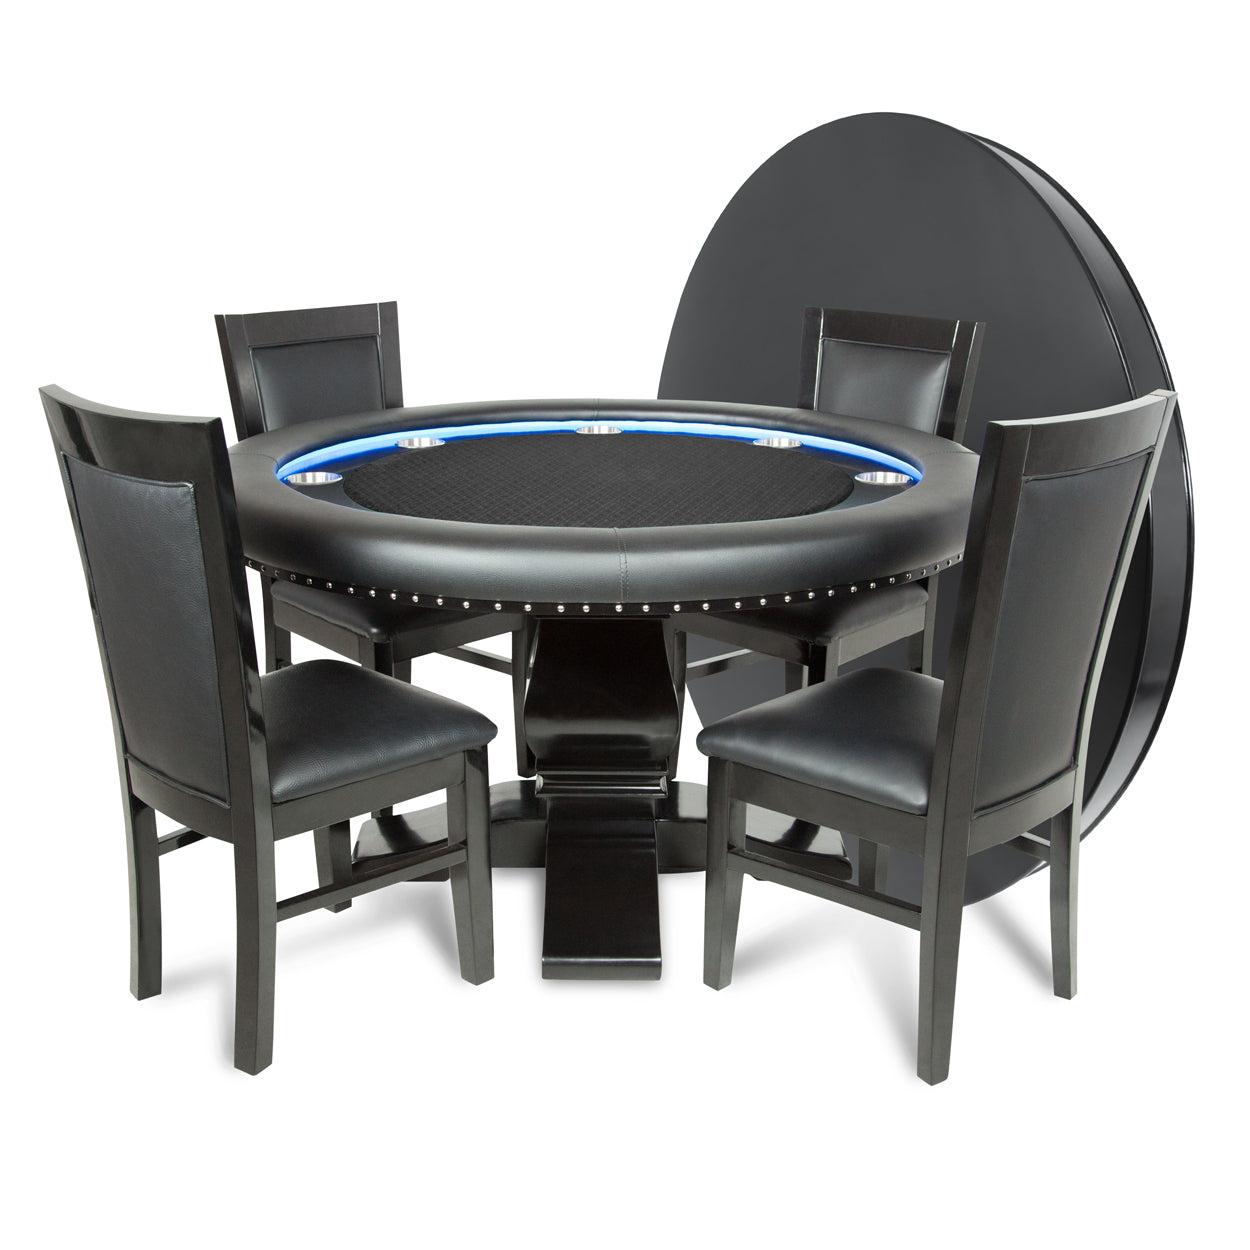 BBO The Ginza LED Poker Table Black Speed Cloth Dining set